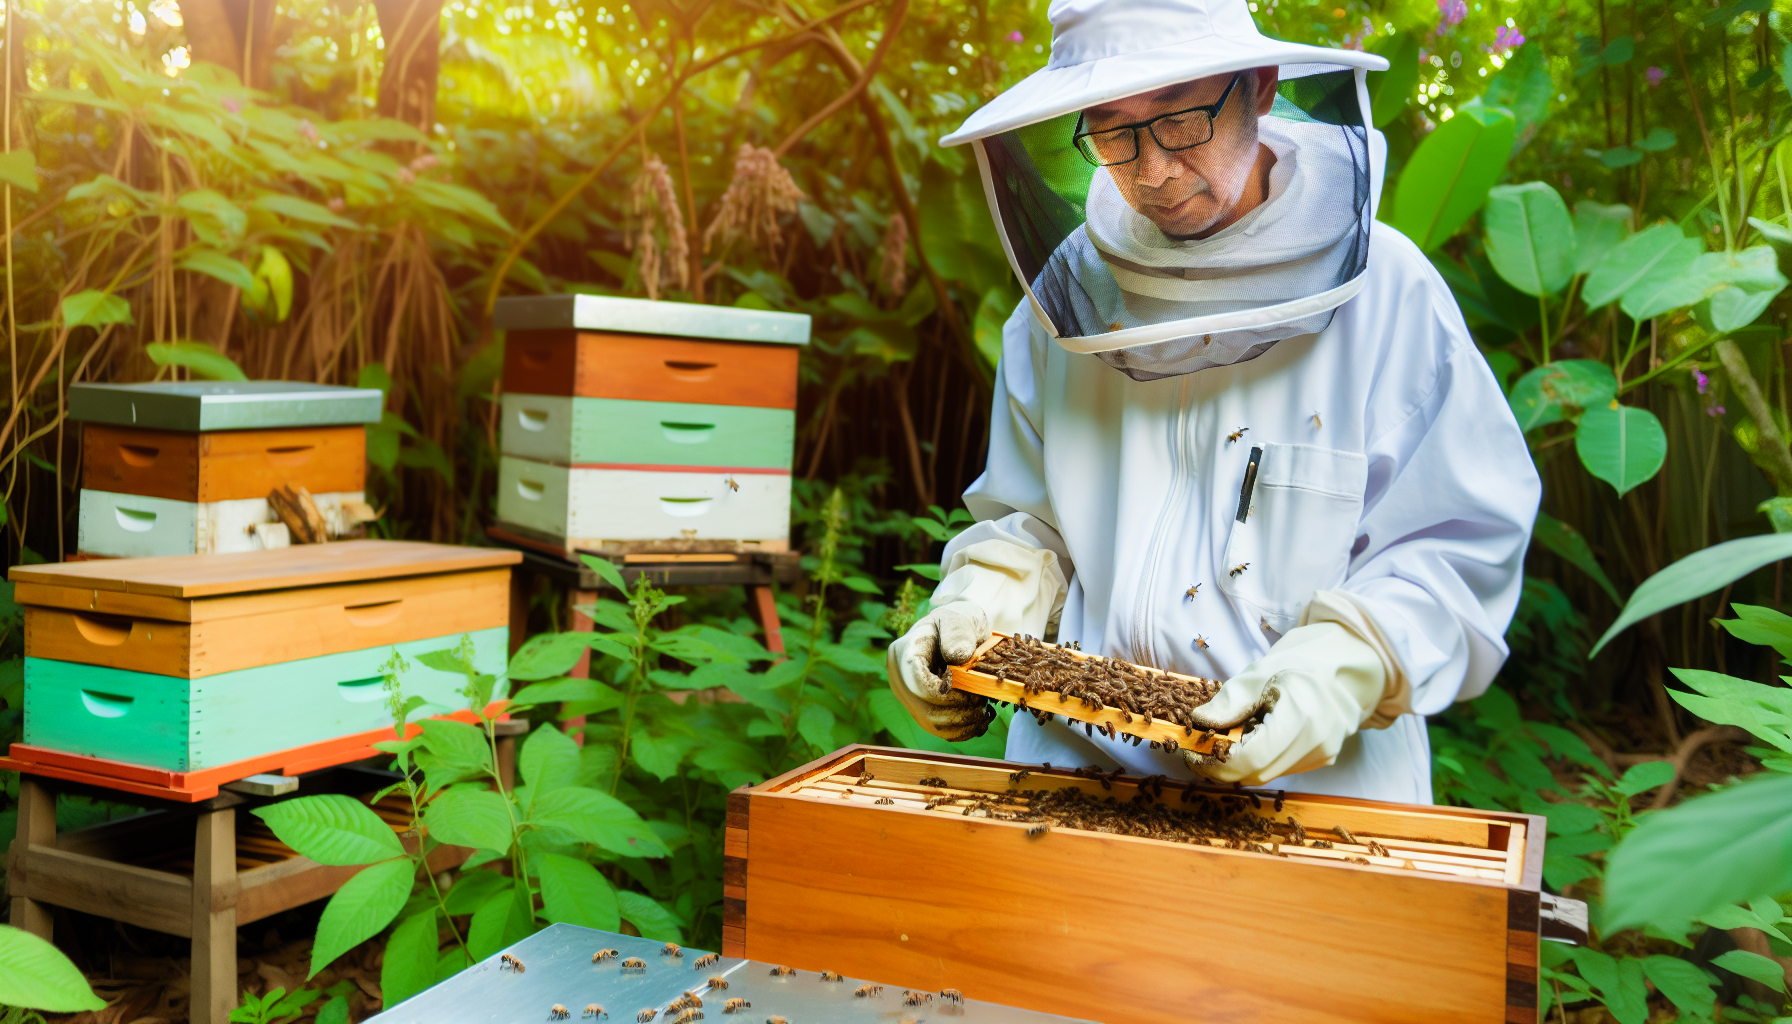 A beekeeper tending to honey bees in a natural environment